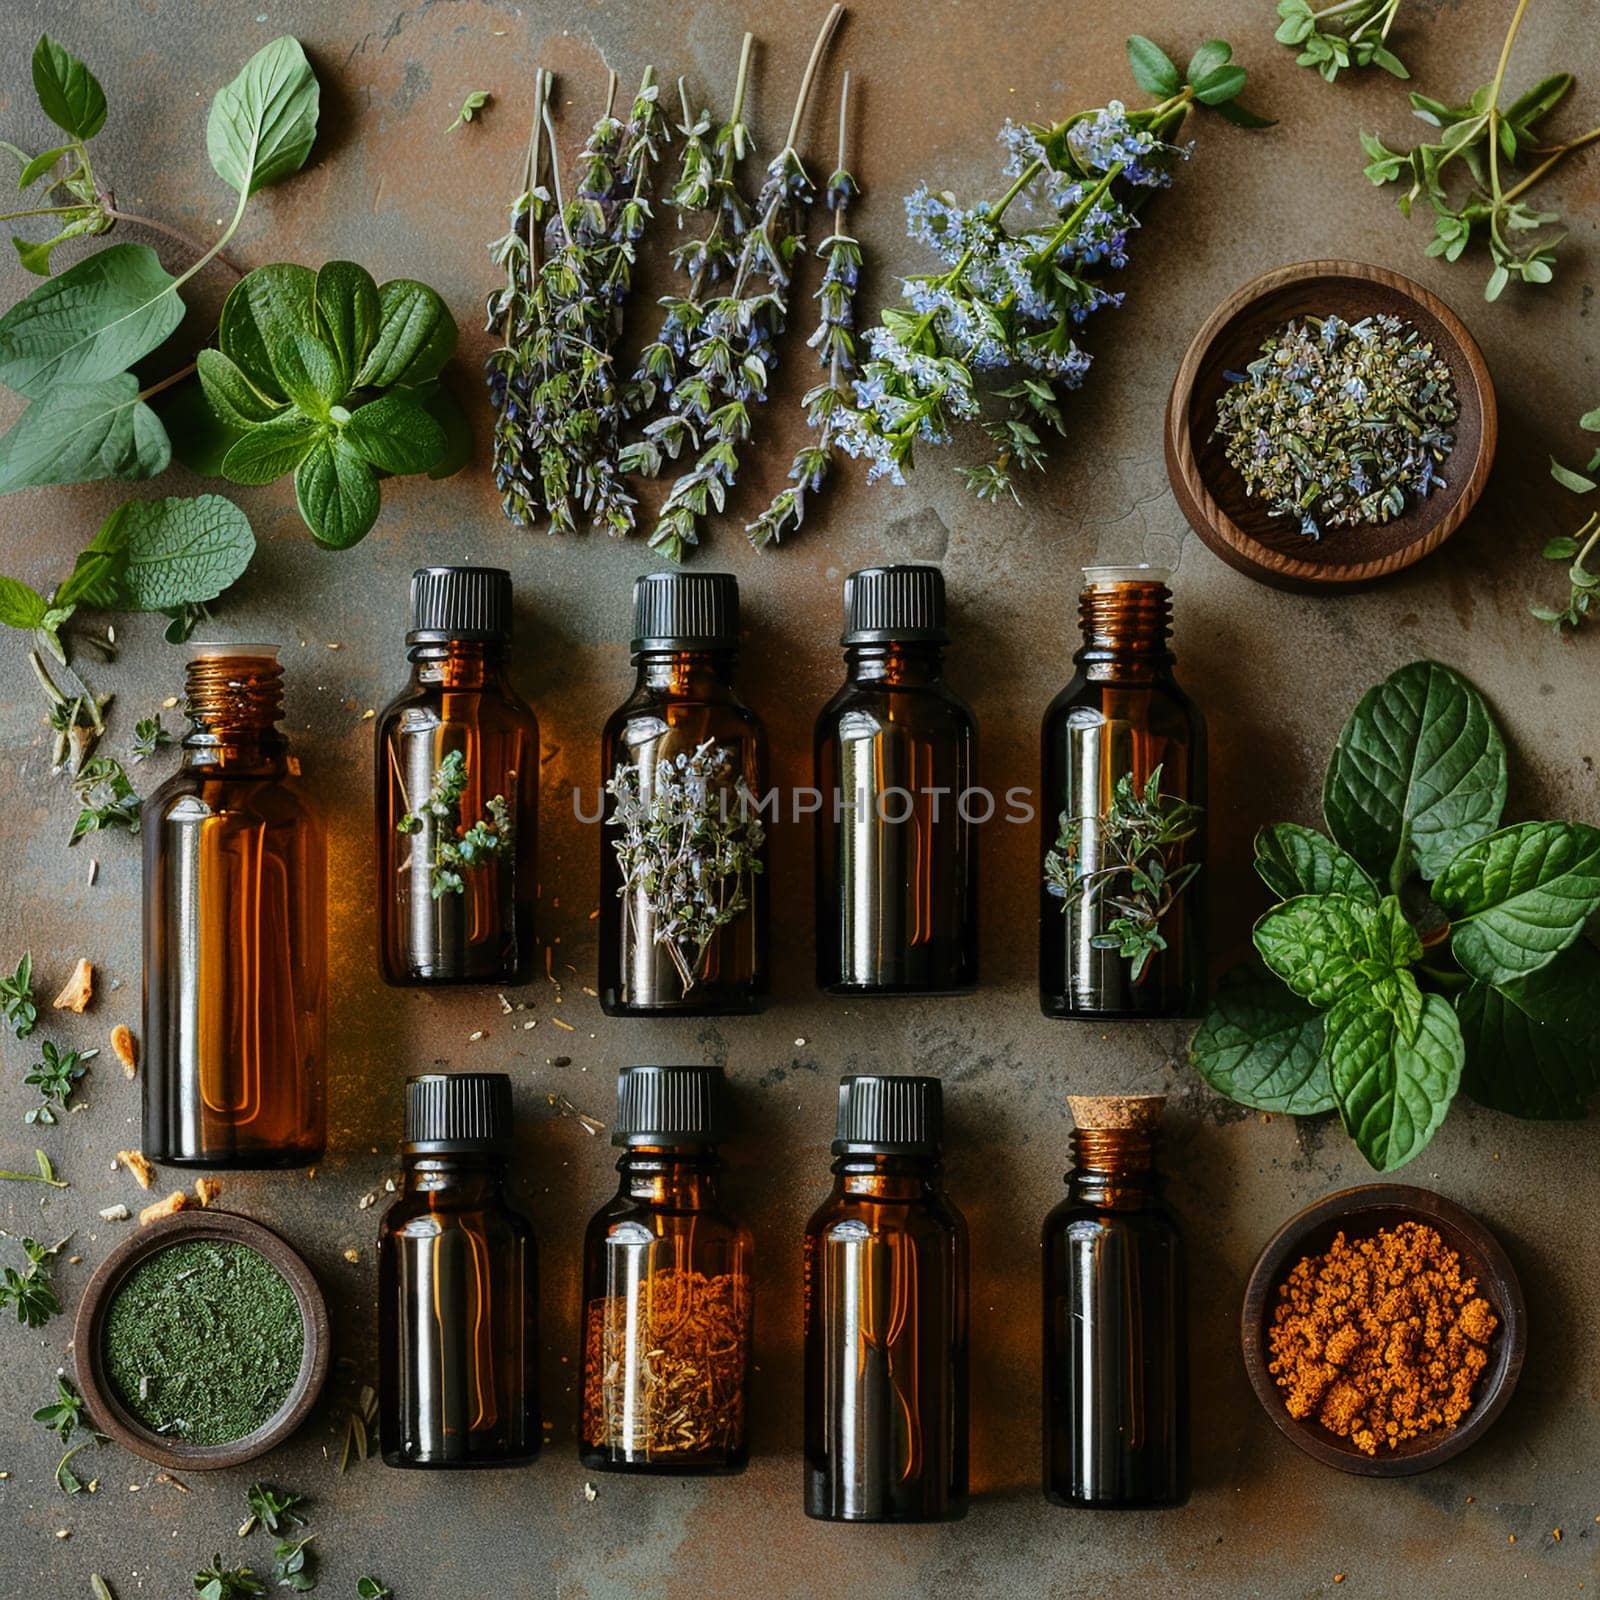 Collection of essential oils and aromatherapy diffusers, denoting wellness and self-care.